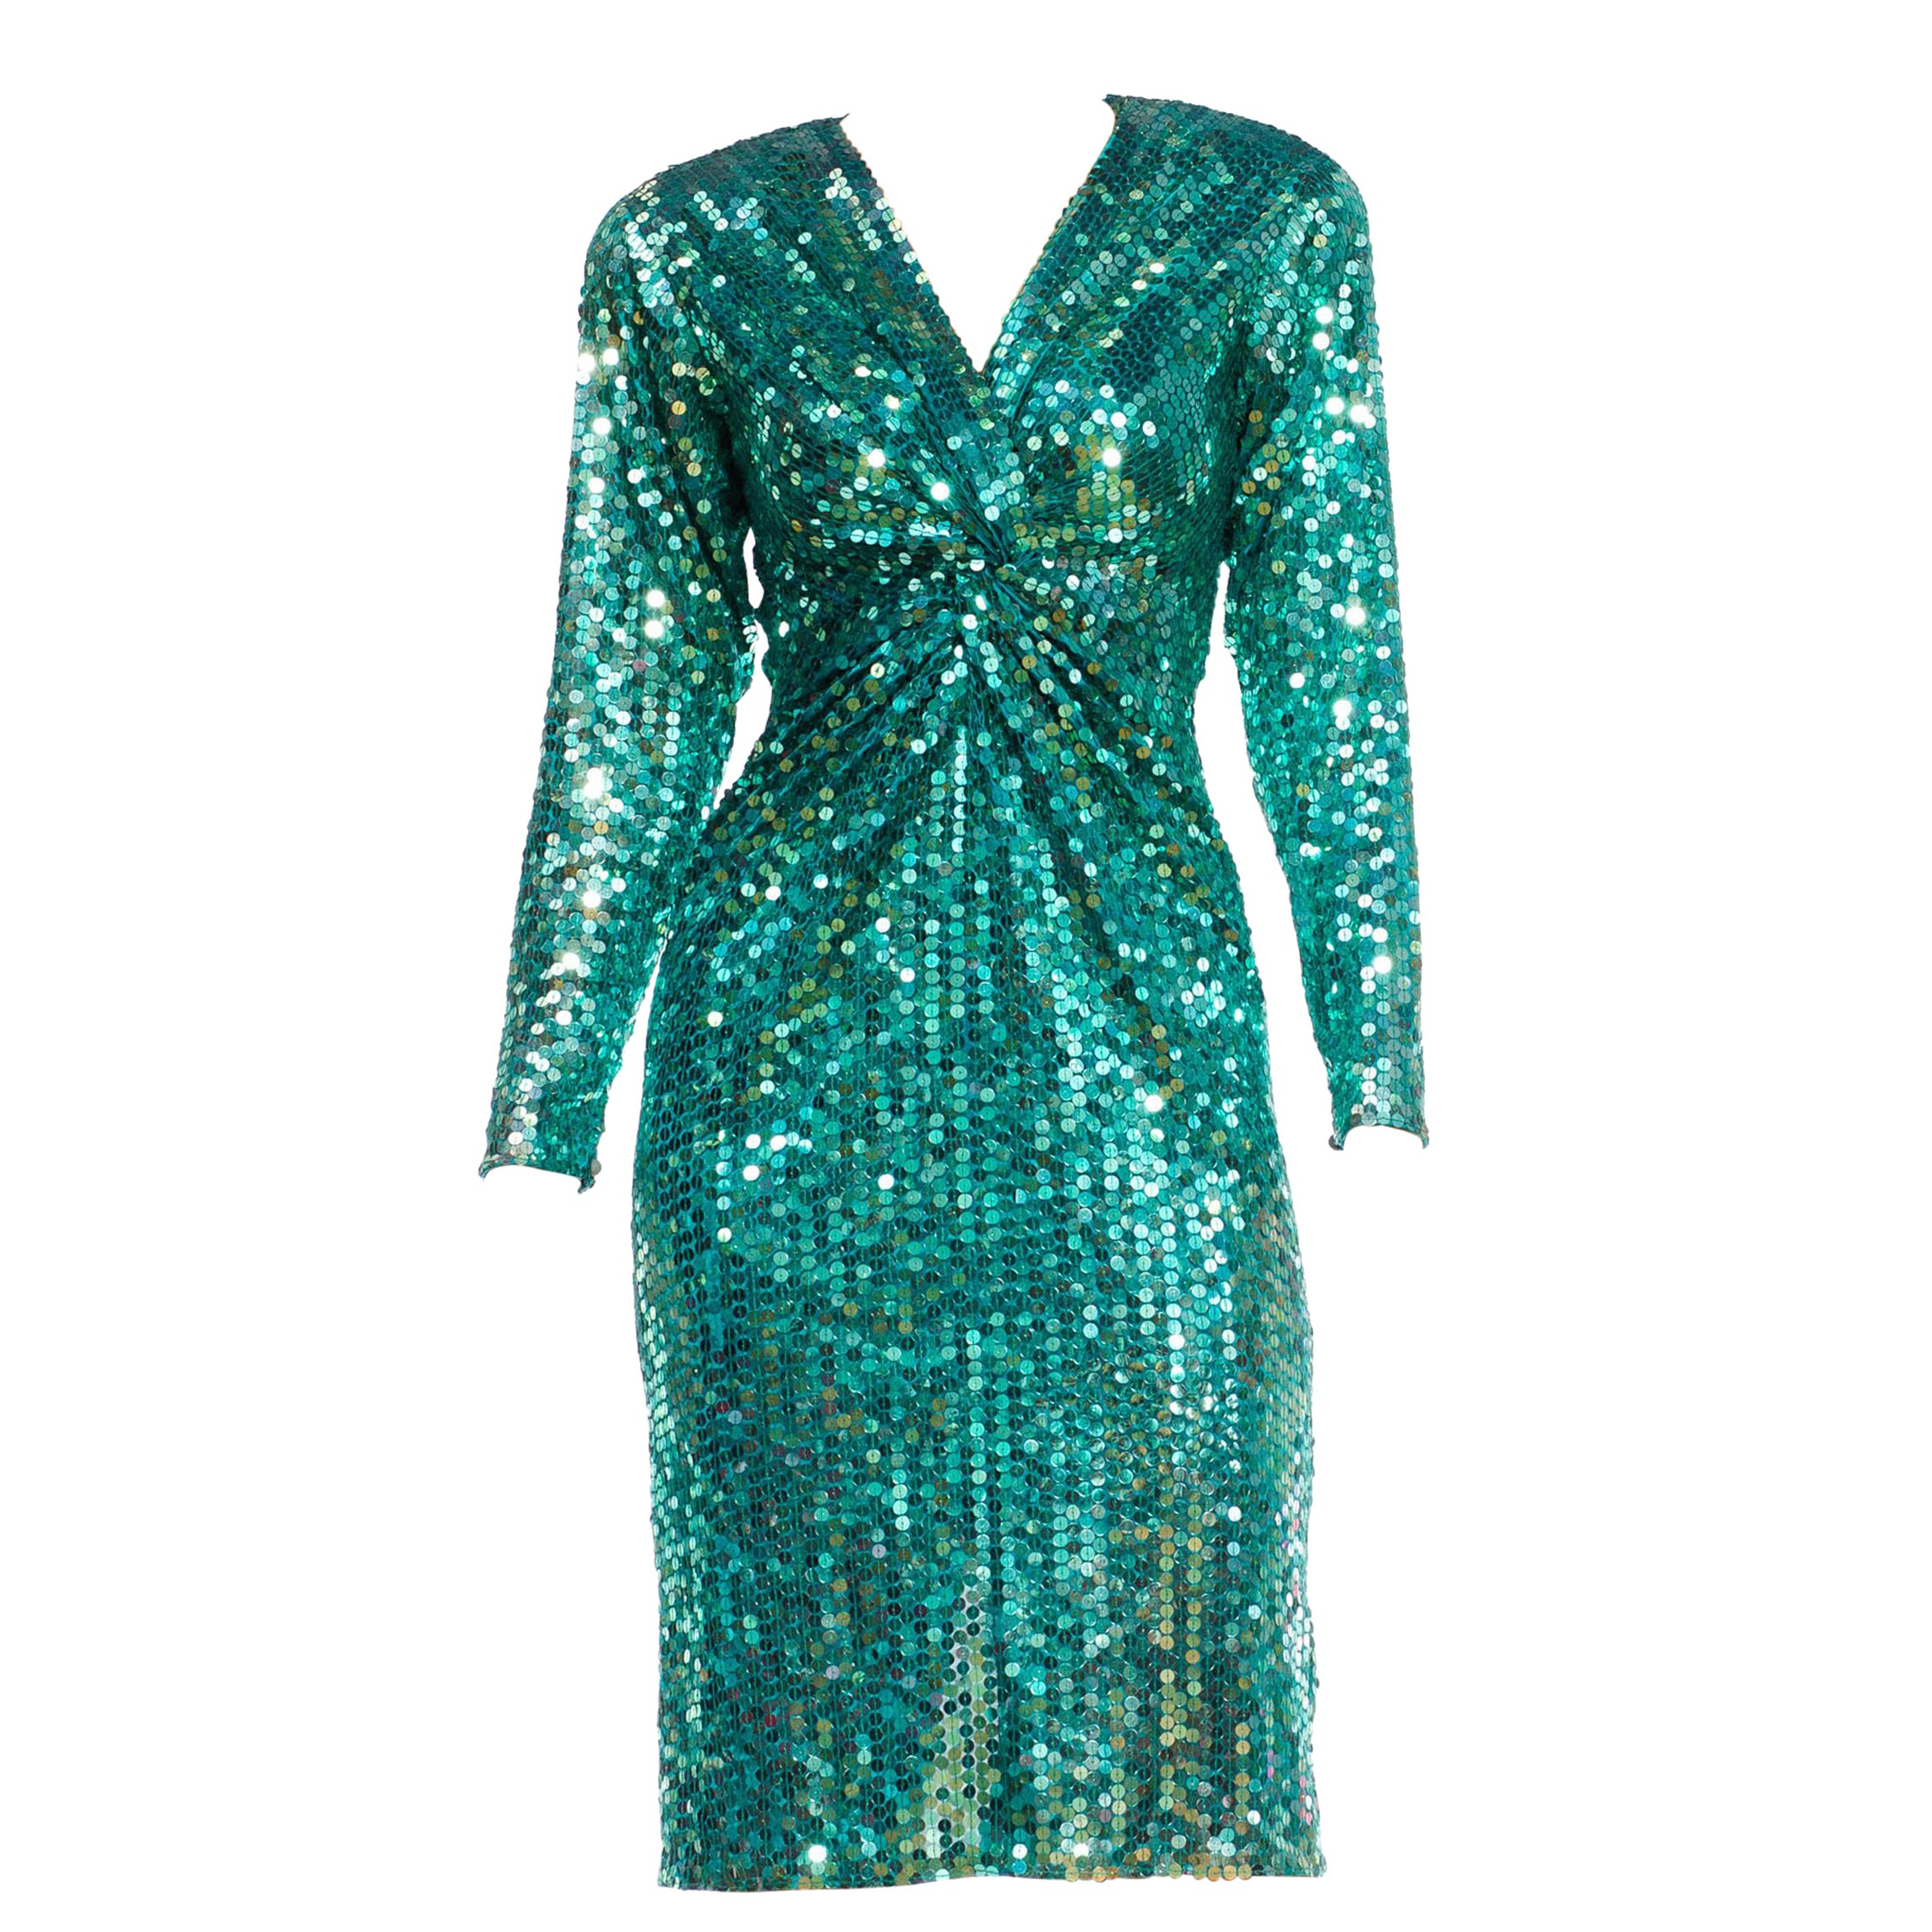 1980S Teal Sequined Poly/Viscose Jersey Low Cut & Long Sleeved Cocktail Dress For Sale